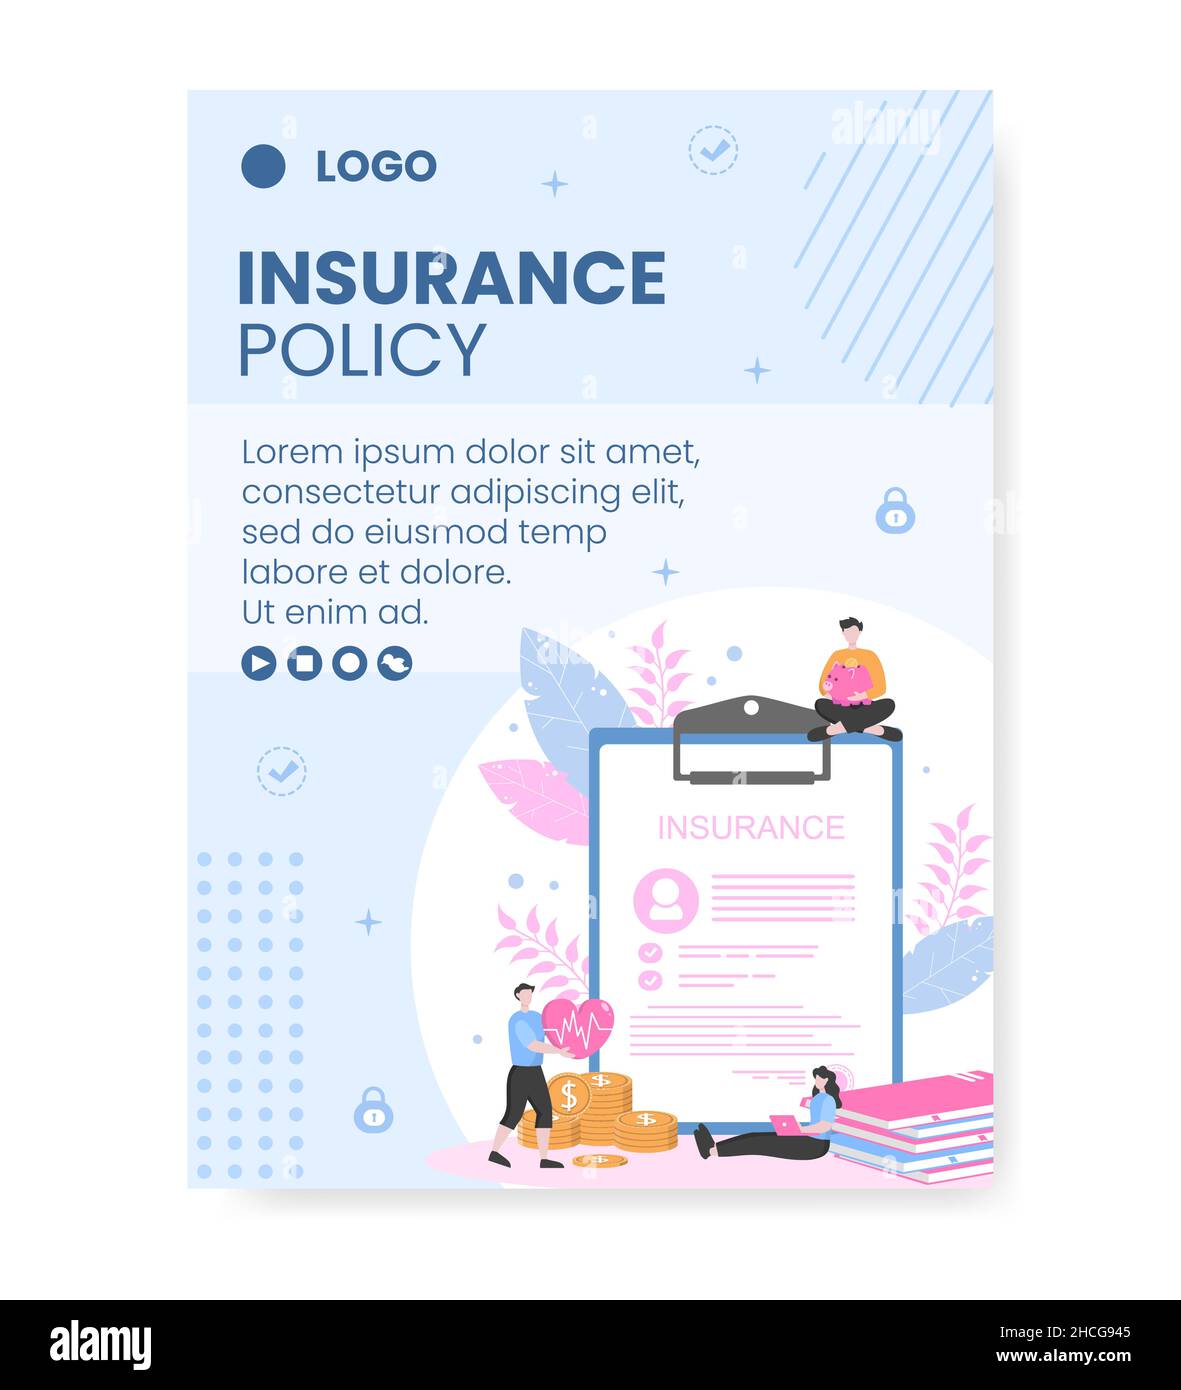 Insurance Policy Post Template Flat Design Illustration Editable of Square Background to Social media, Greeting Card or Web Stock Vector